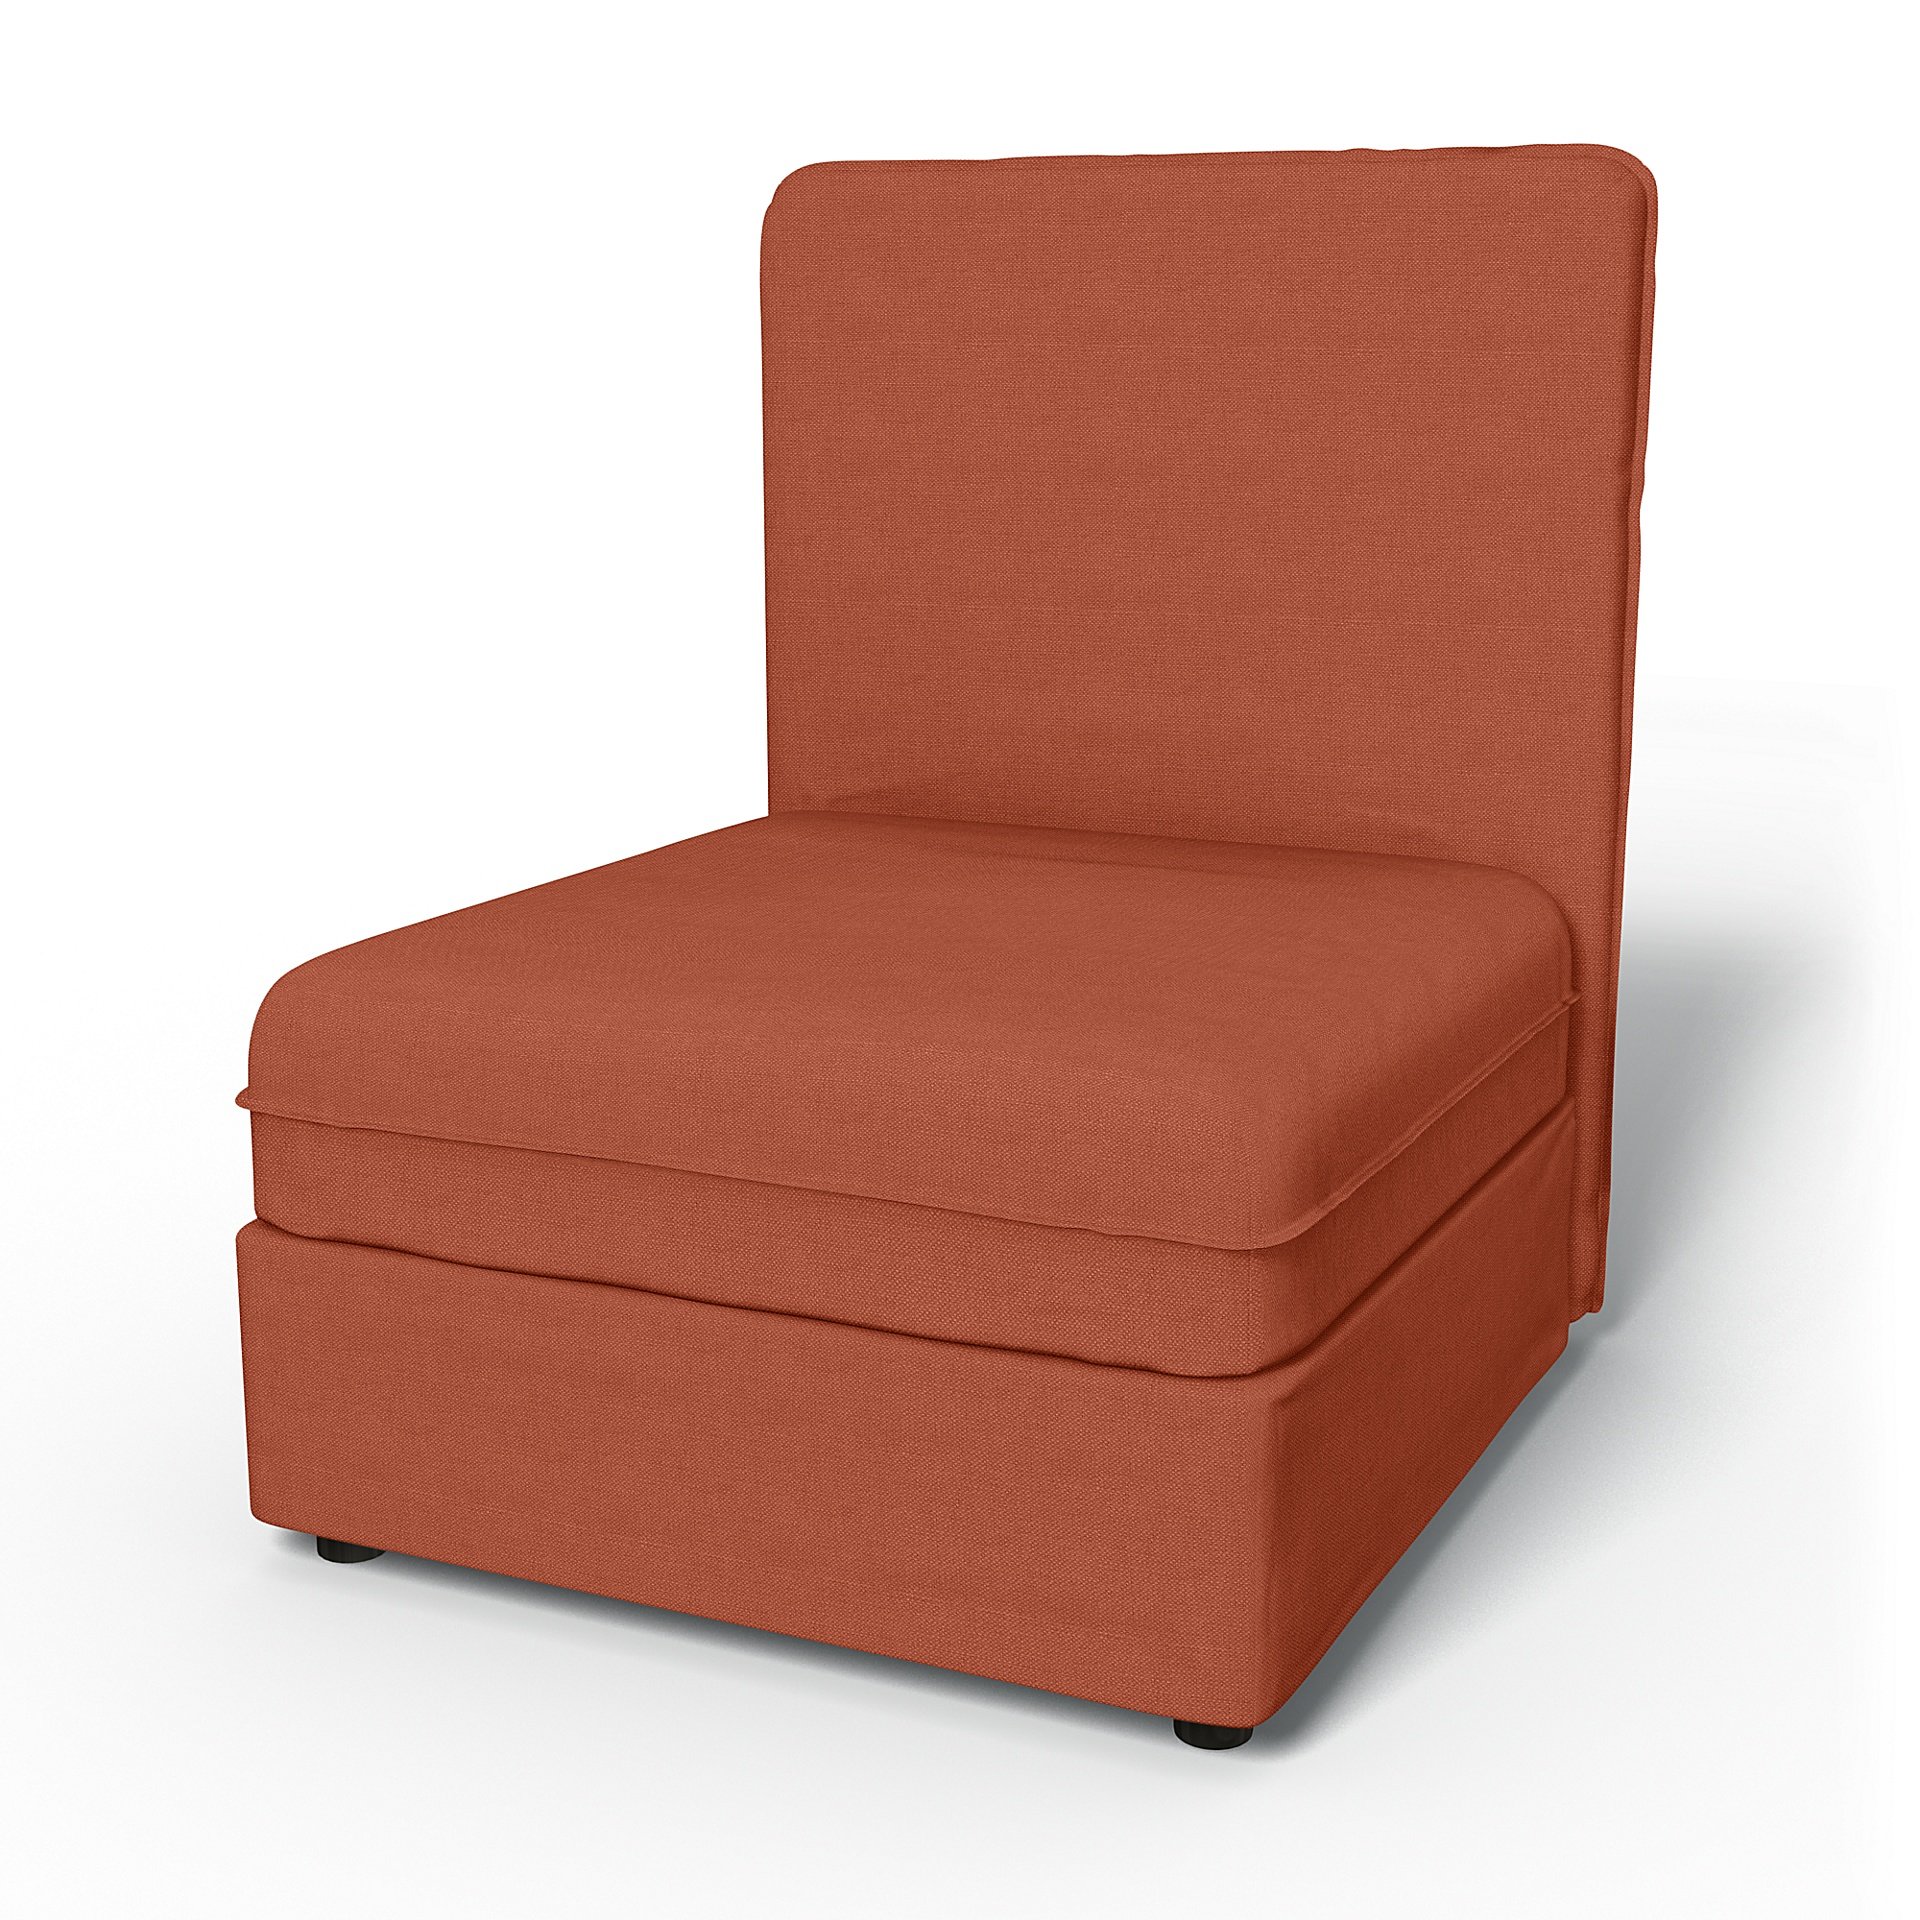 IKEA - Vallentuna Seat Module with High Back and Storage Cover 80x100cm 32x39in, Burnt Orange, Linen